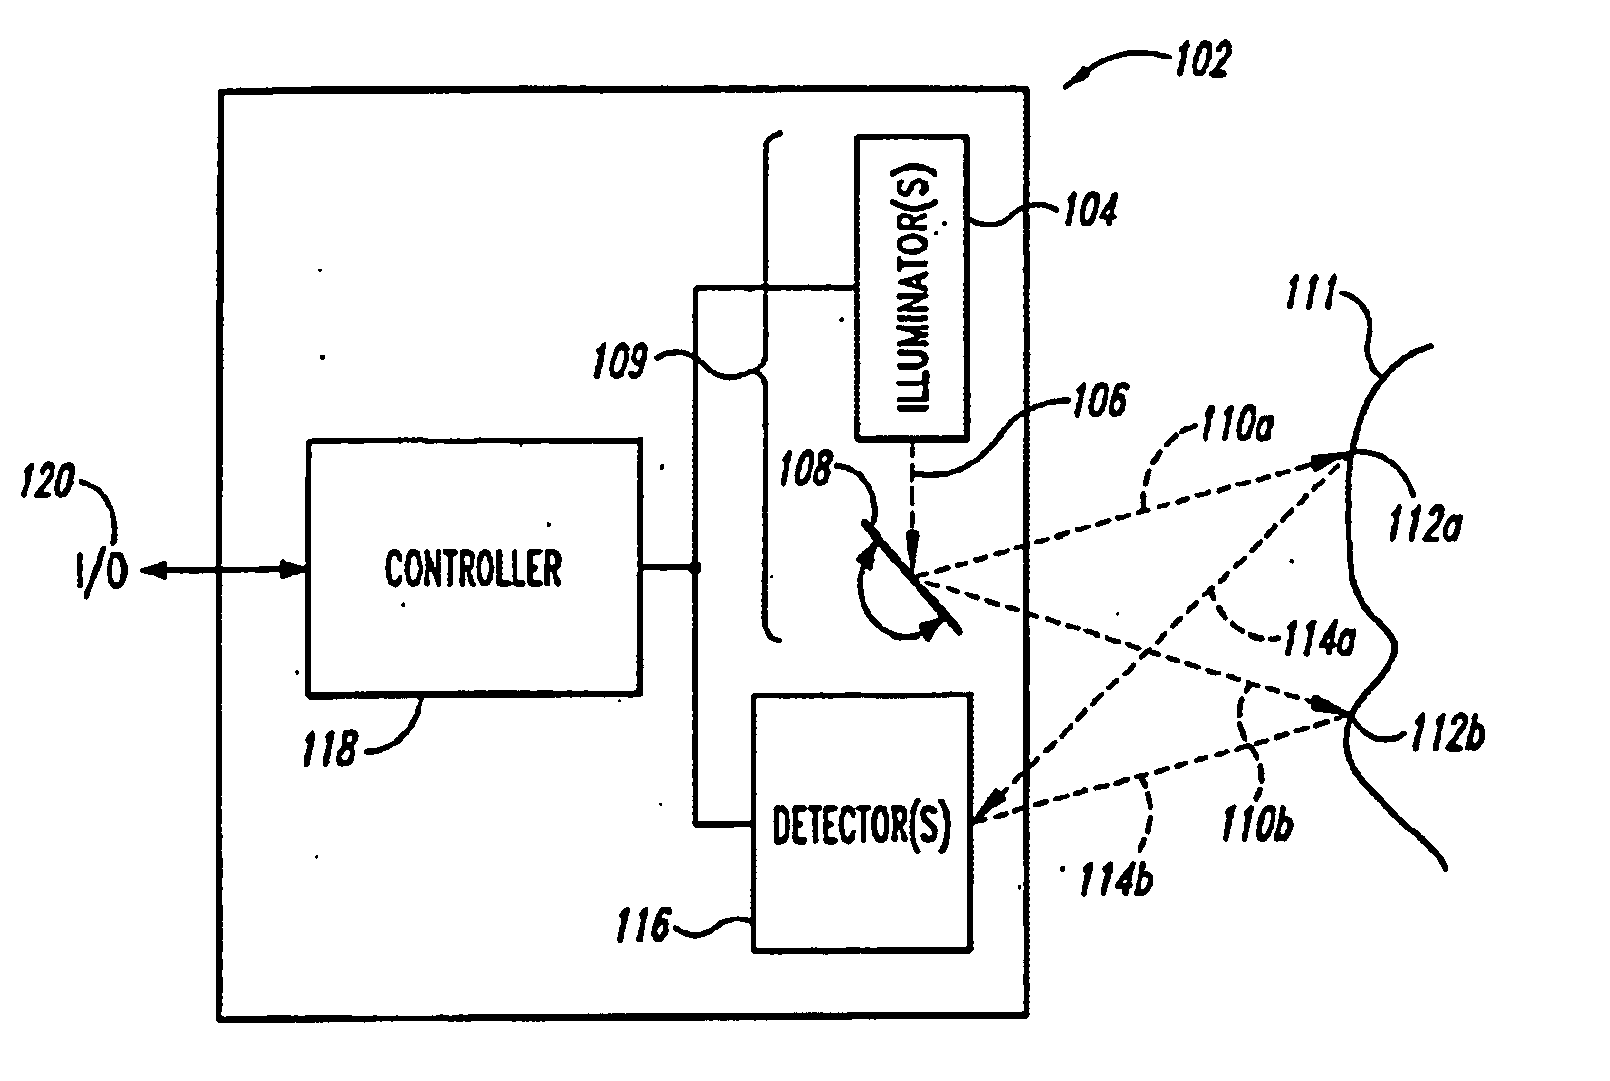 Apparatus and method for projecting a variable pattern of electromagnetic energy